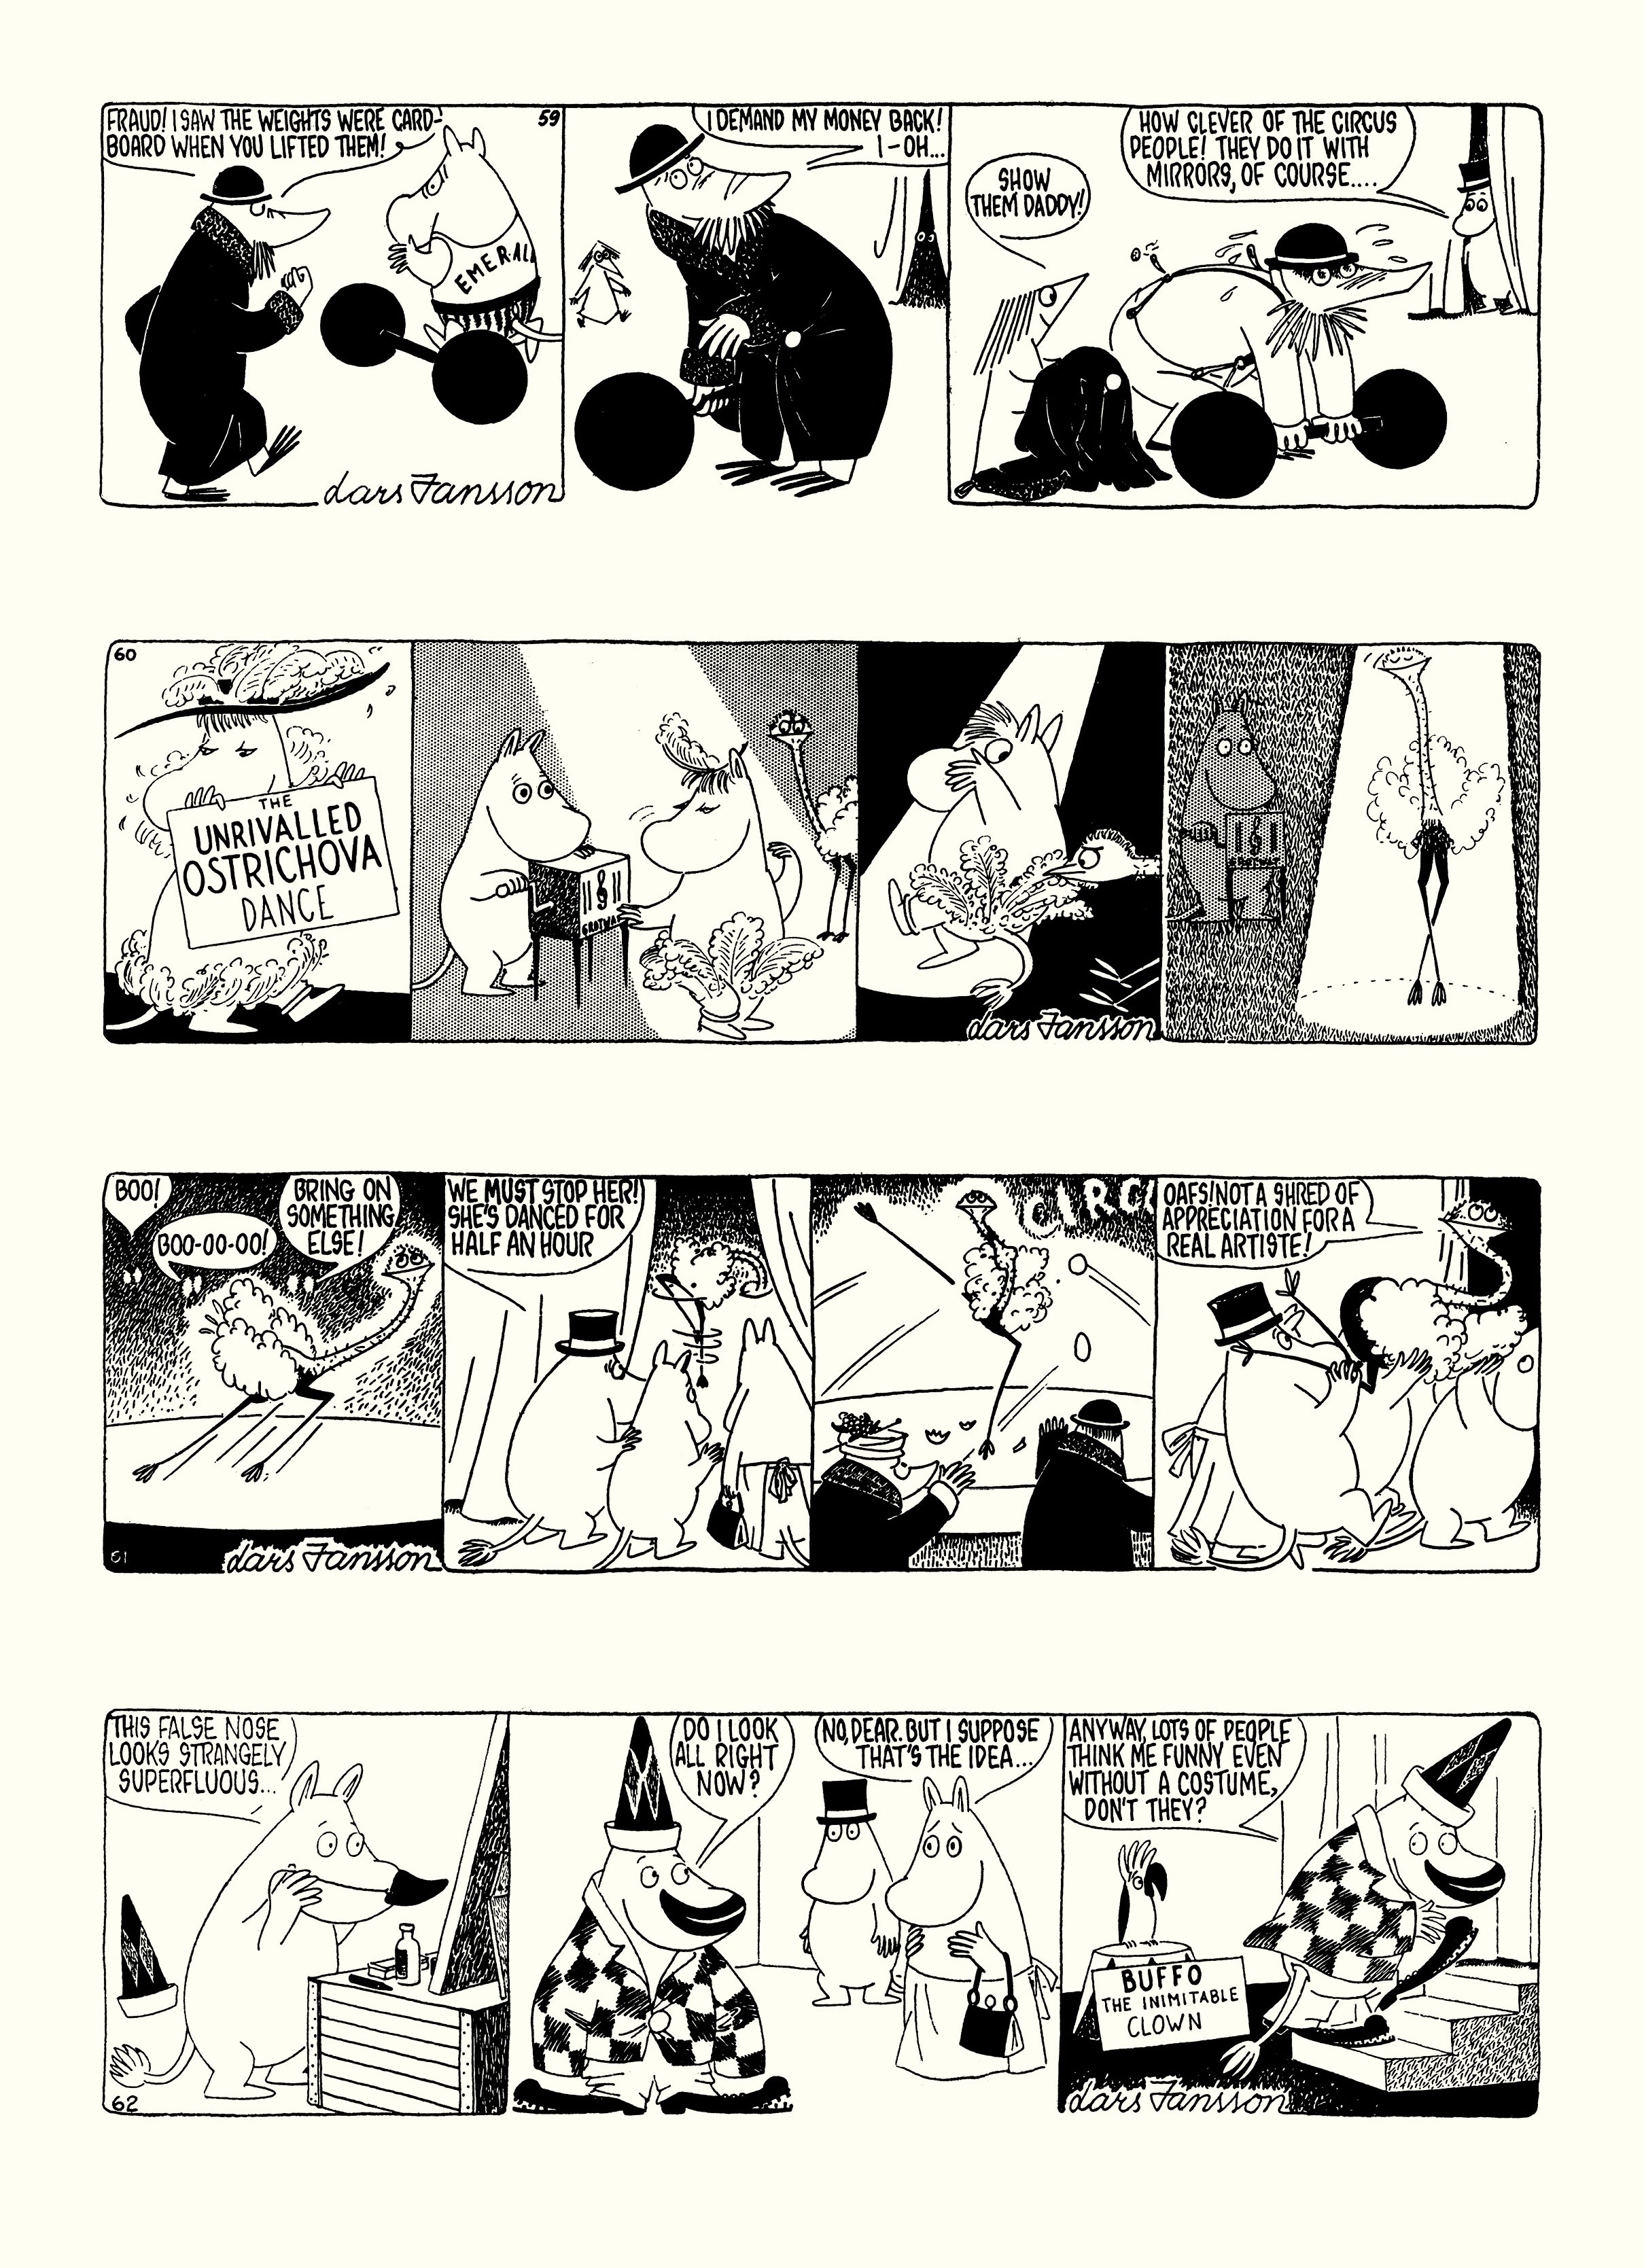 Read online Moomin: The Complete Lars Jansson Comic Strip comic -  Issue # TPB 6 - 83